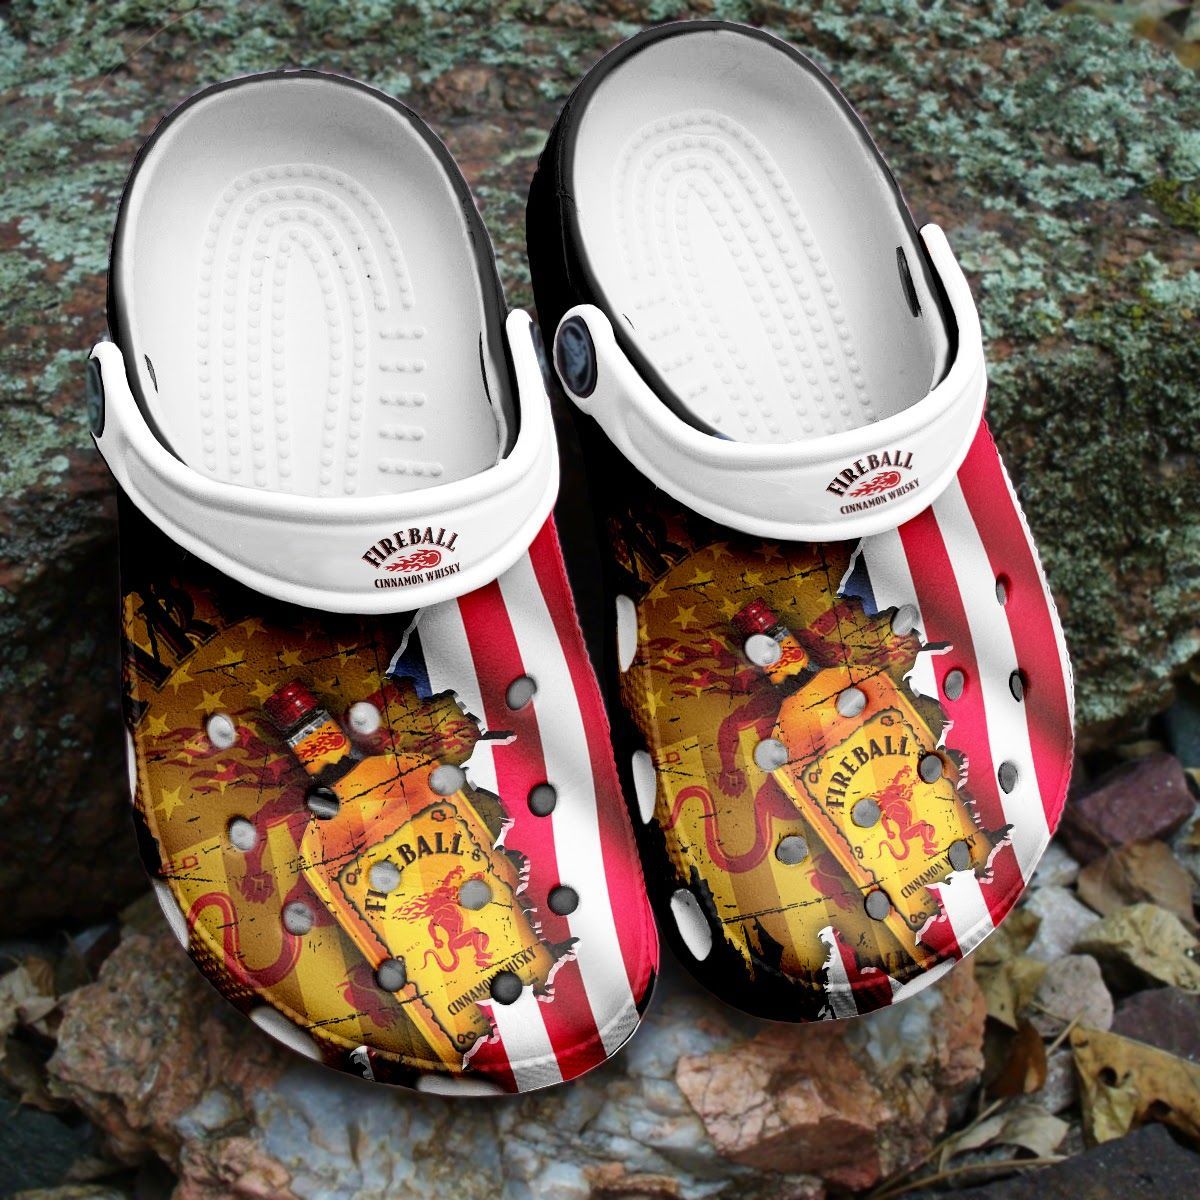 If you'd like to purchase a pair of Crocband Clogs, be sure to check out the official website. 101